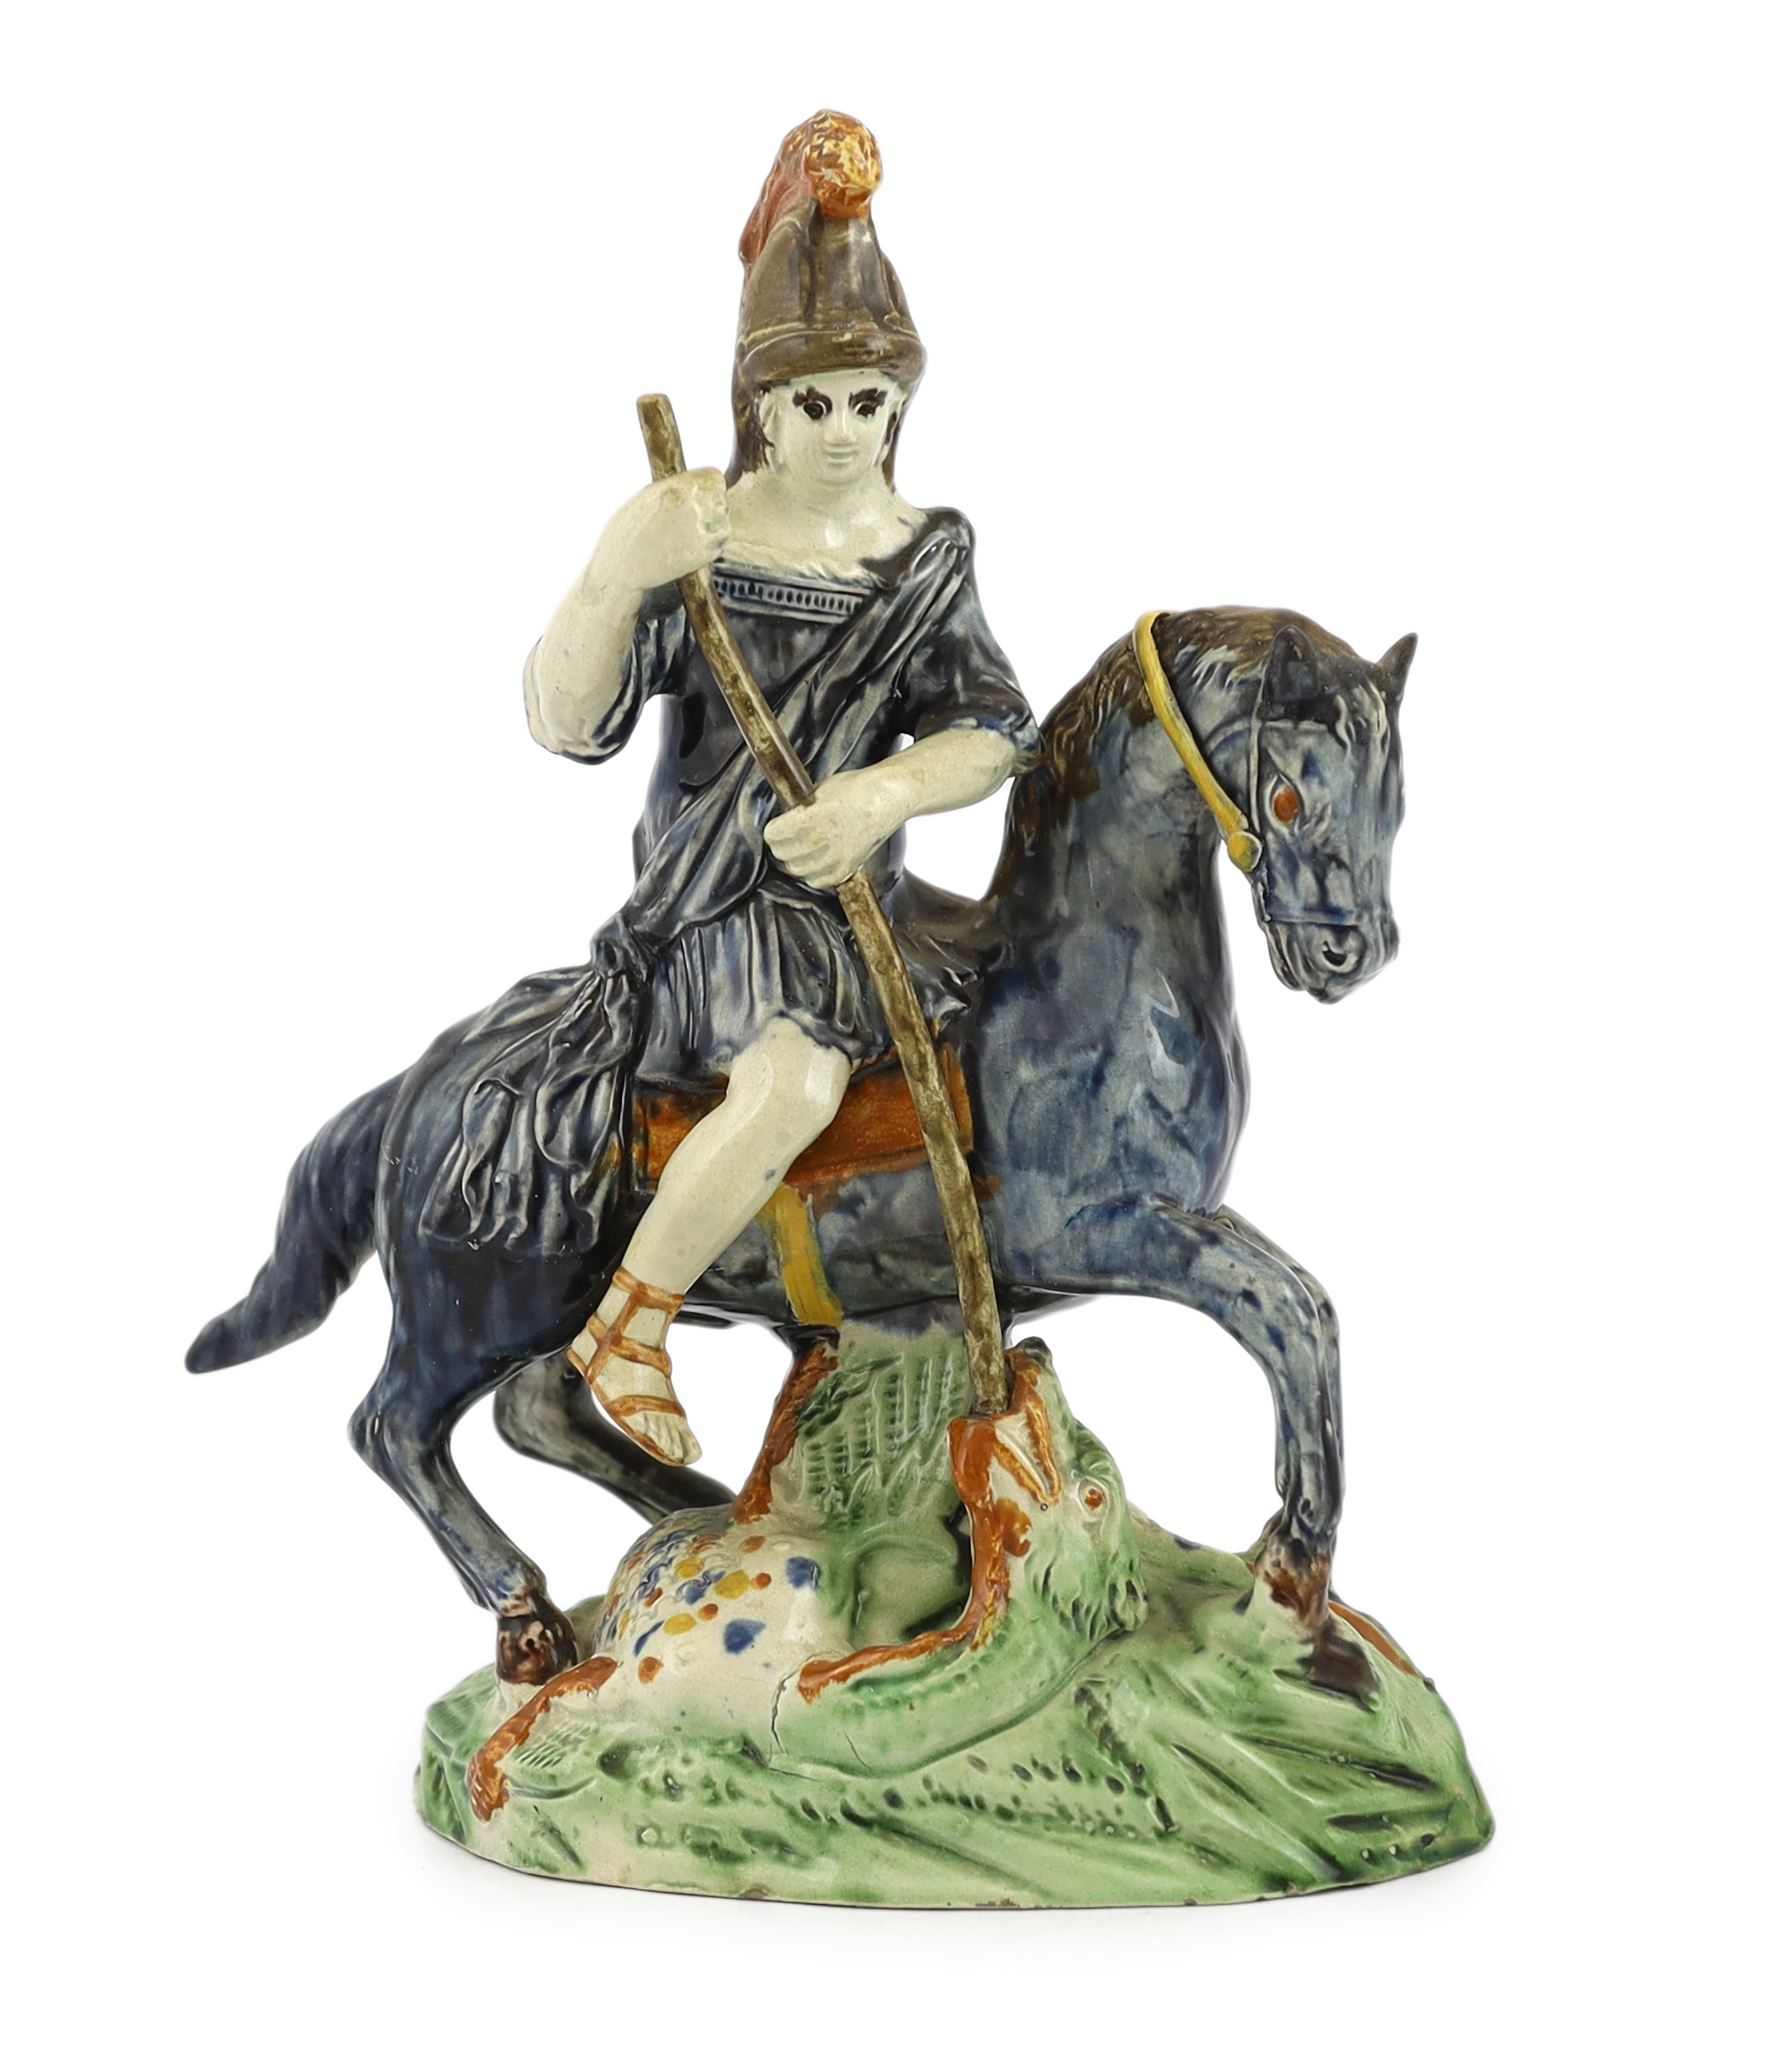 A Ralph Wood group of St. George & The Dragon, c.1795, some restoration